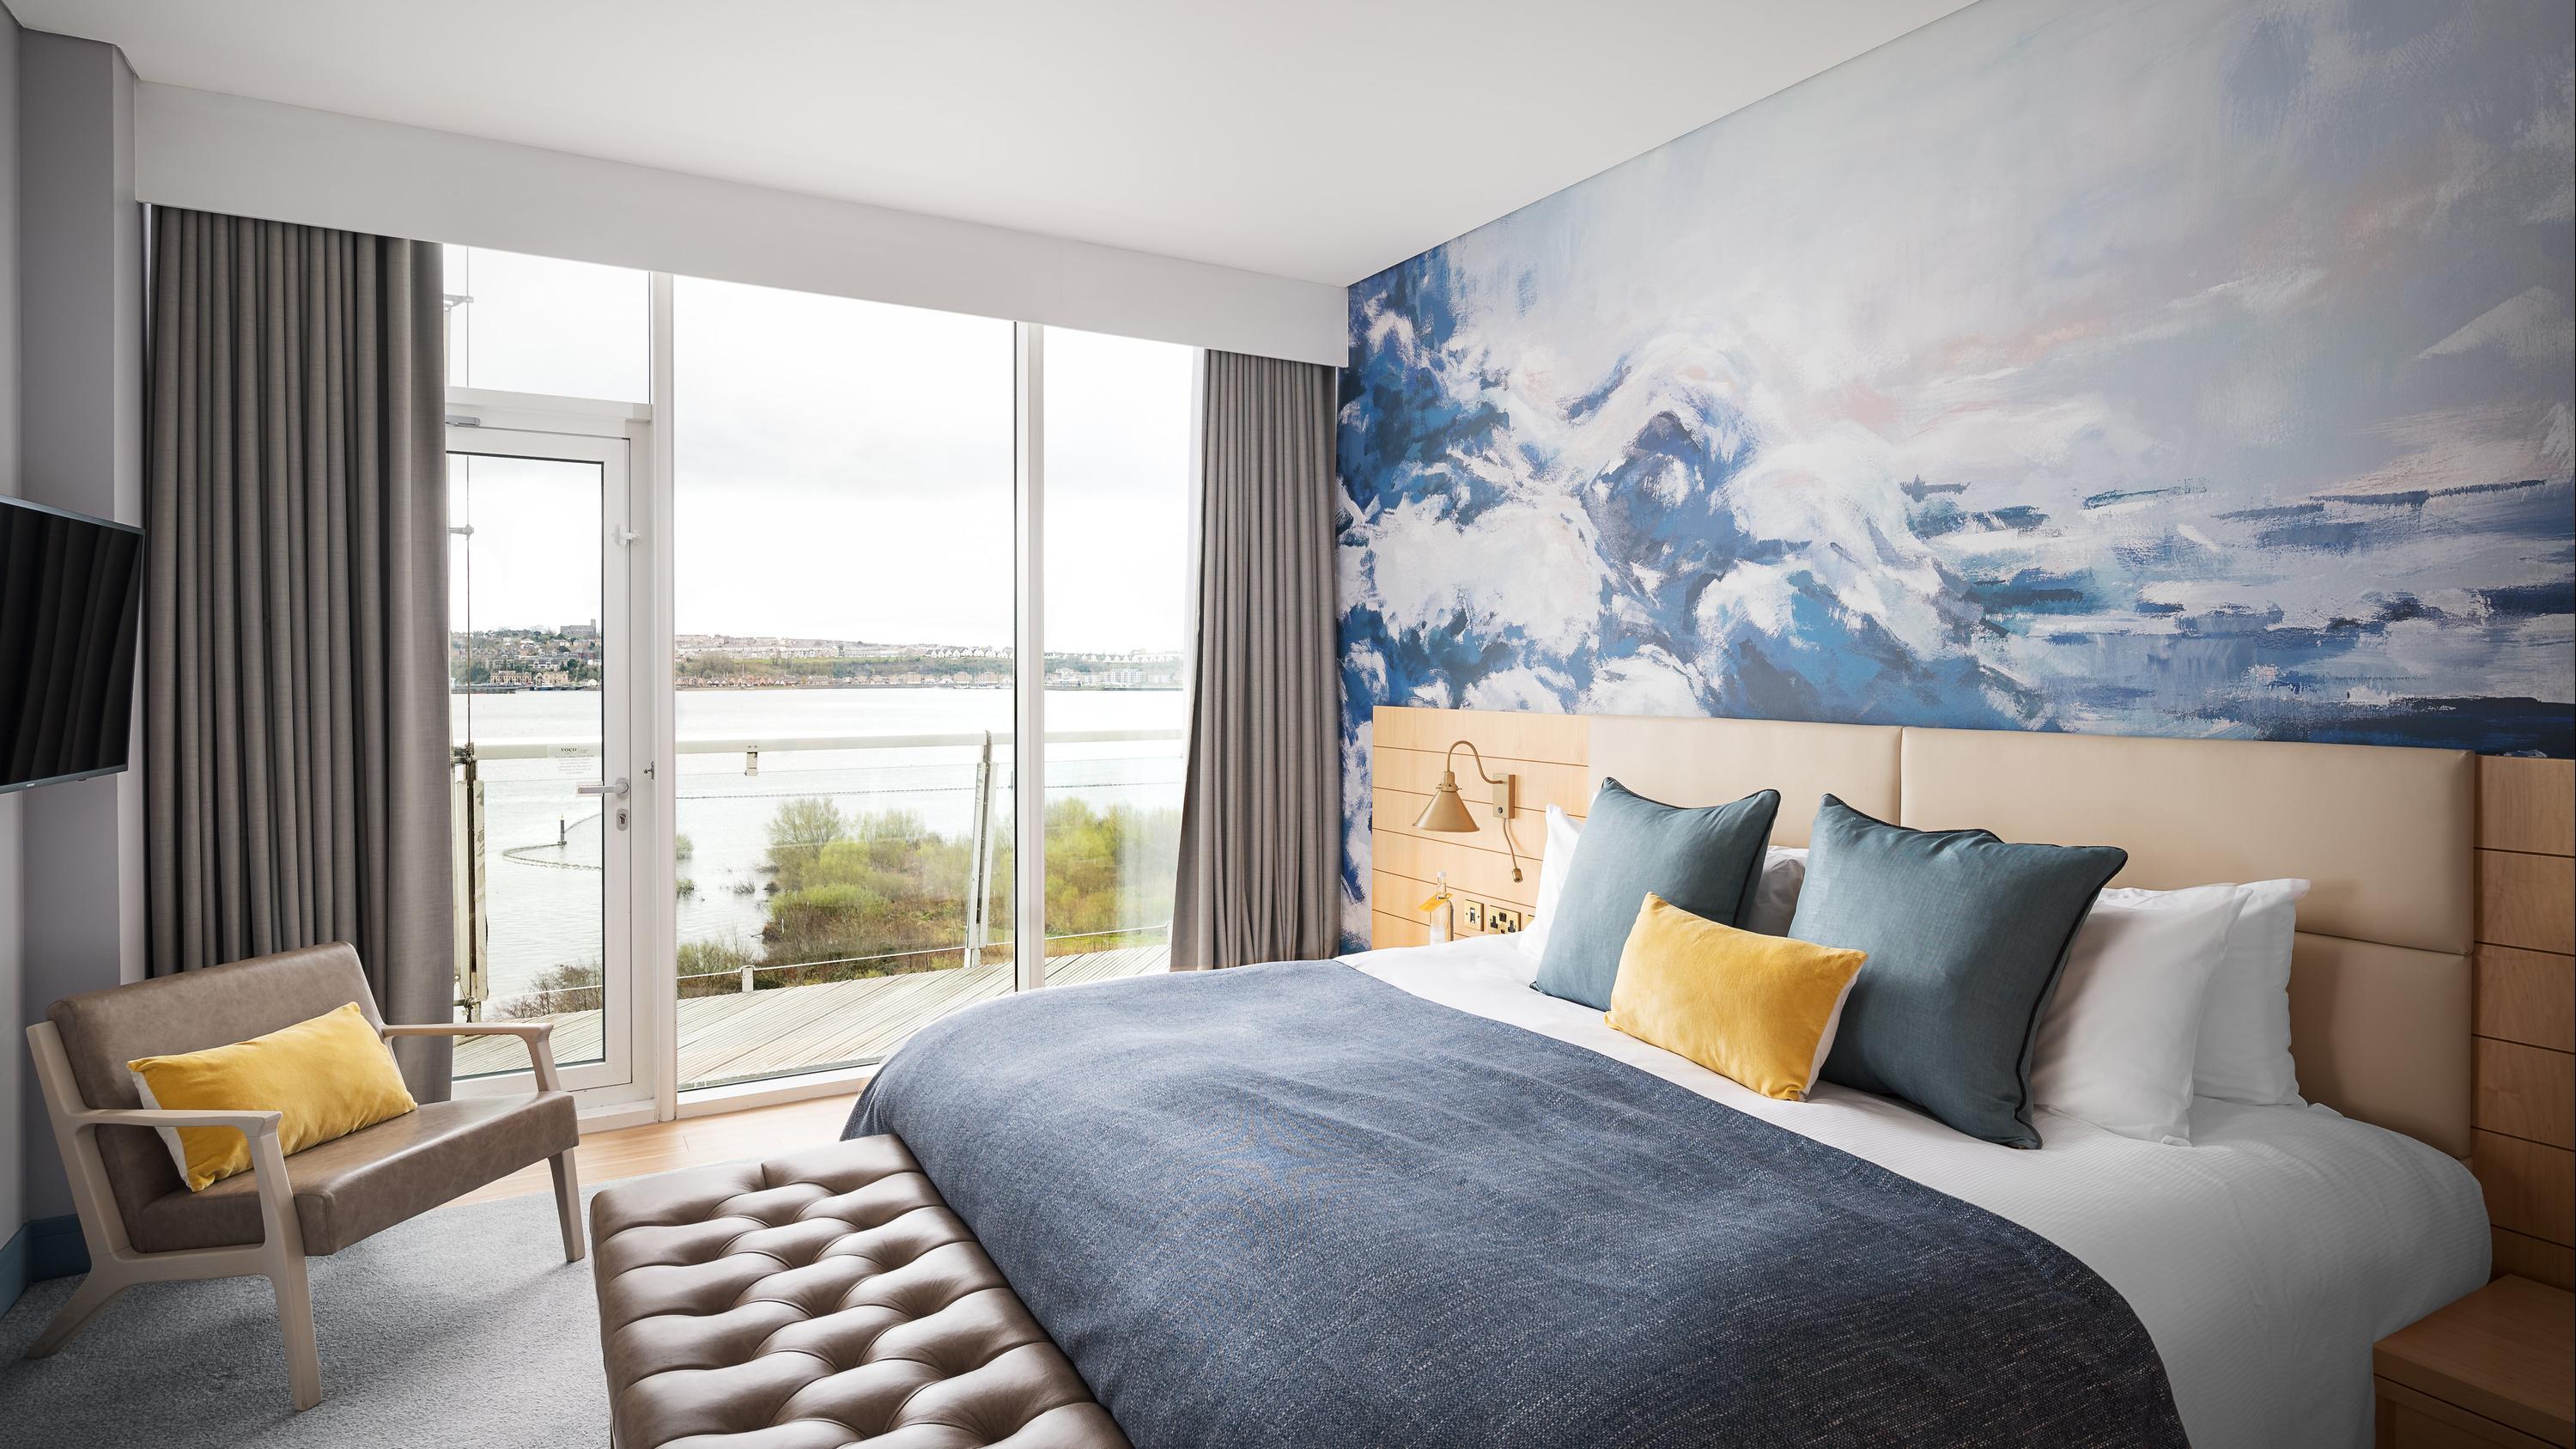 11 Best Hotels in Cardiff Bay, Cardiff